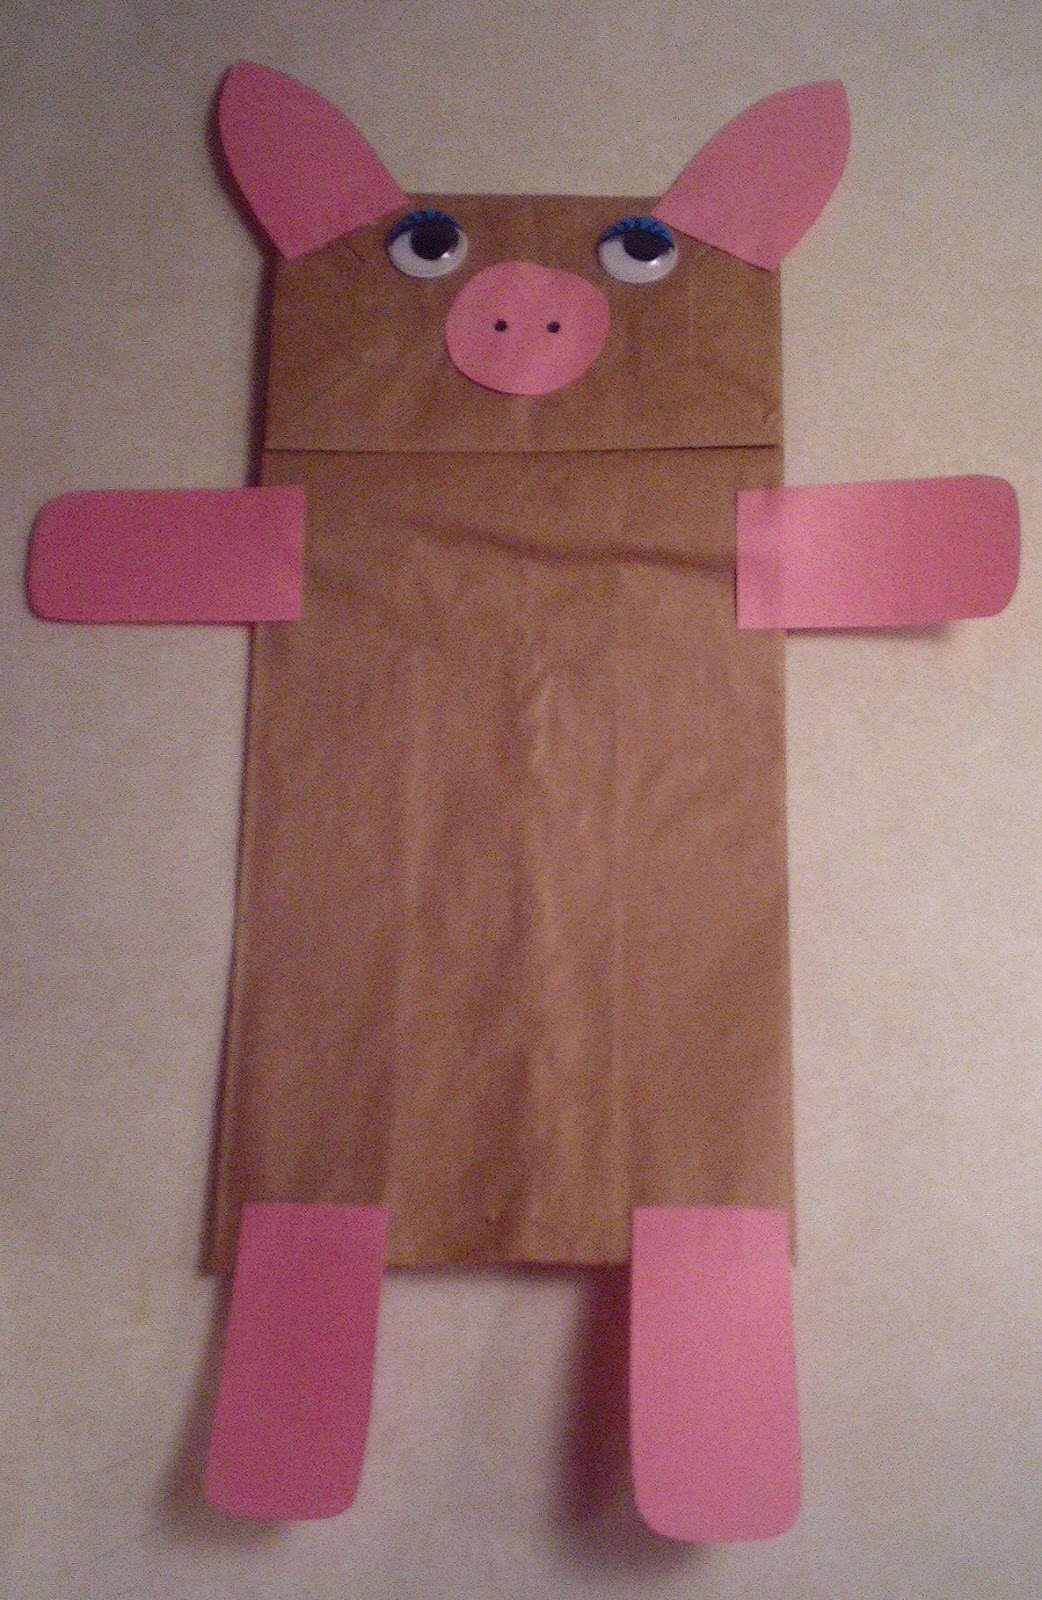 59 Paper Bag Puppets | Guide Patterns